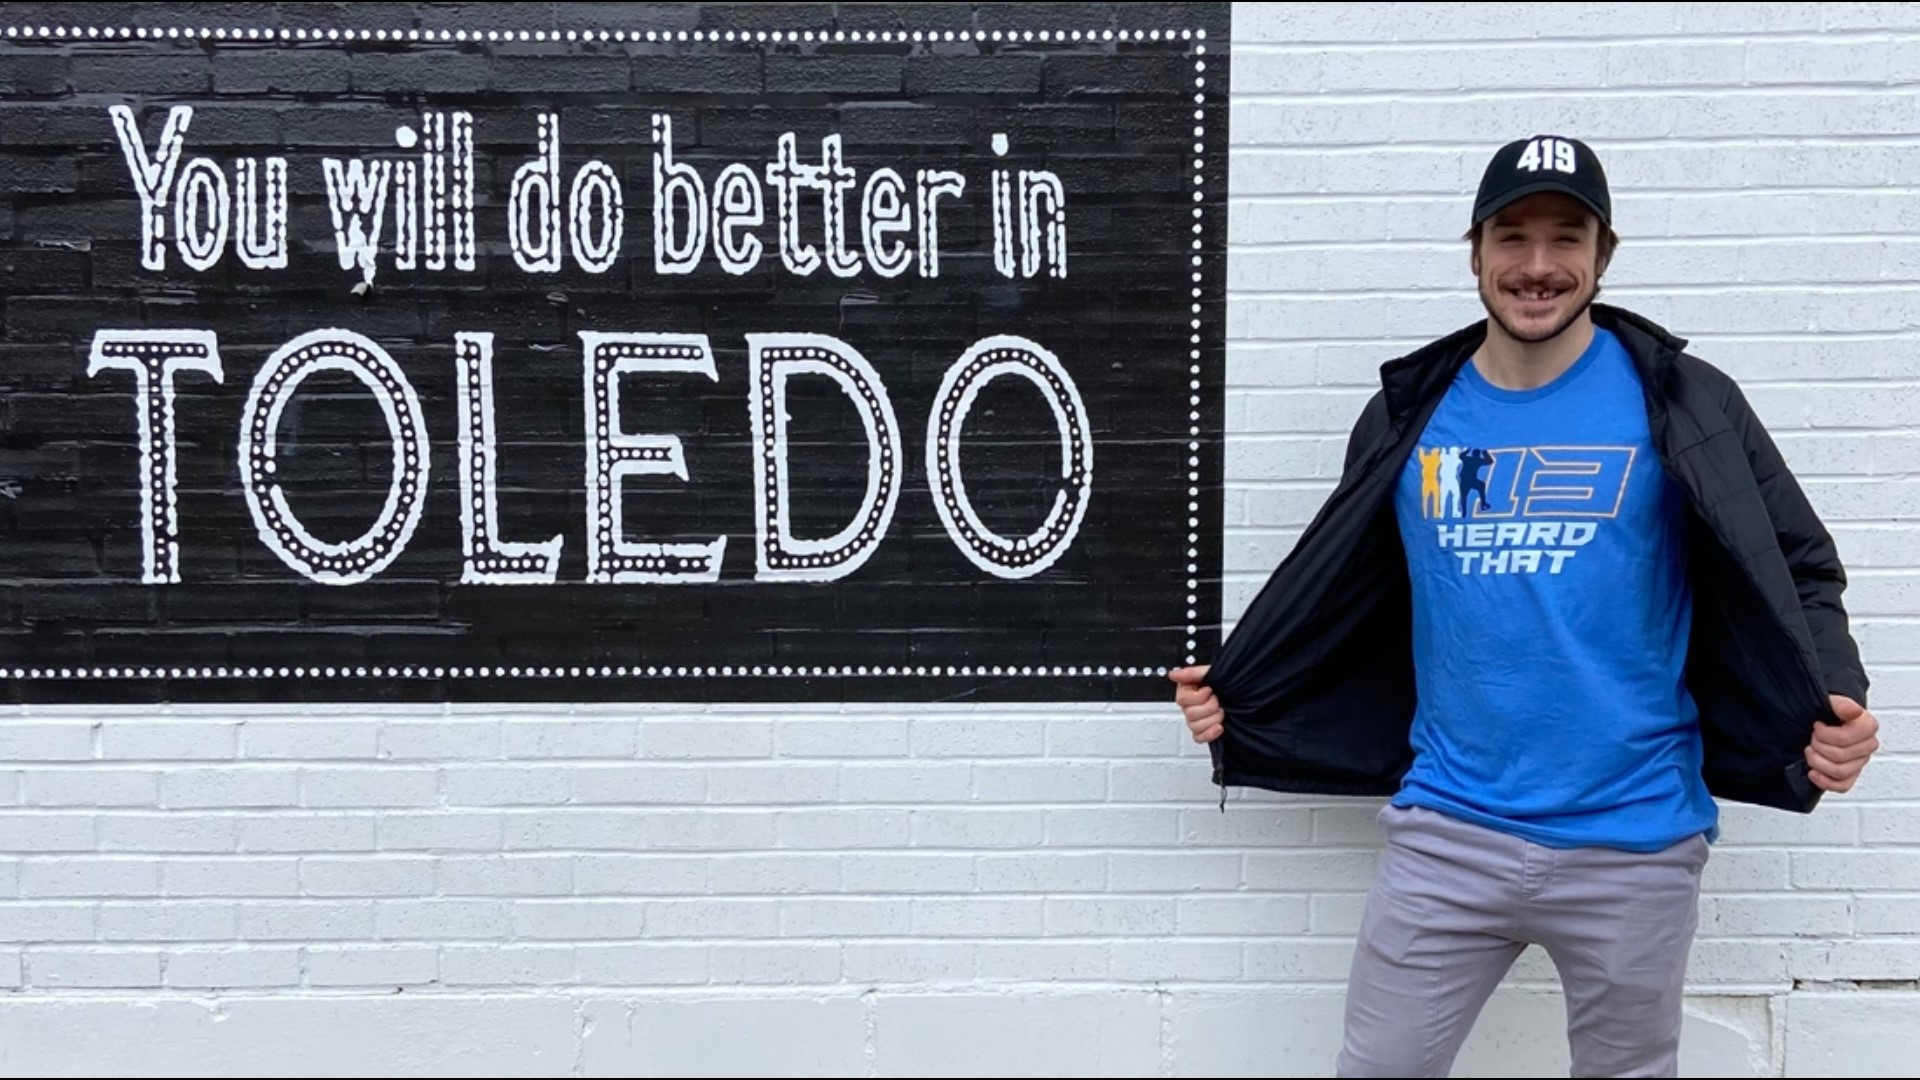 Mitchell Heard teamed up with Jupmode to create shirts with his catchphrase "Heard That" with all sales benefitting the Family and Child Abuse Prevention Center.